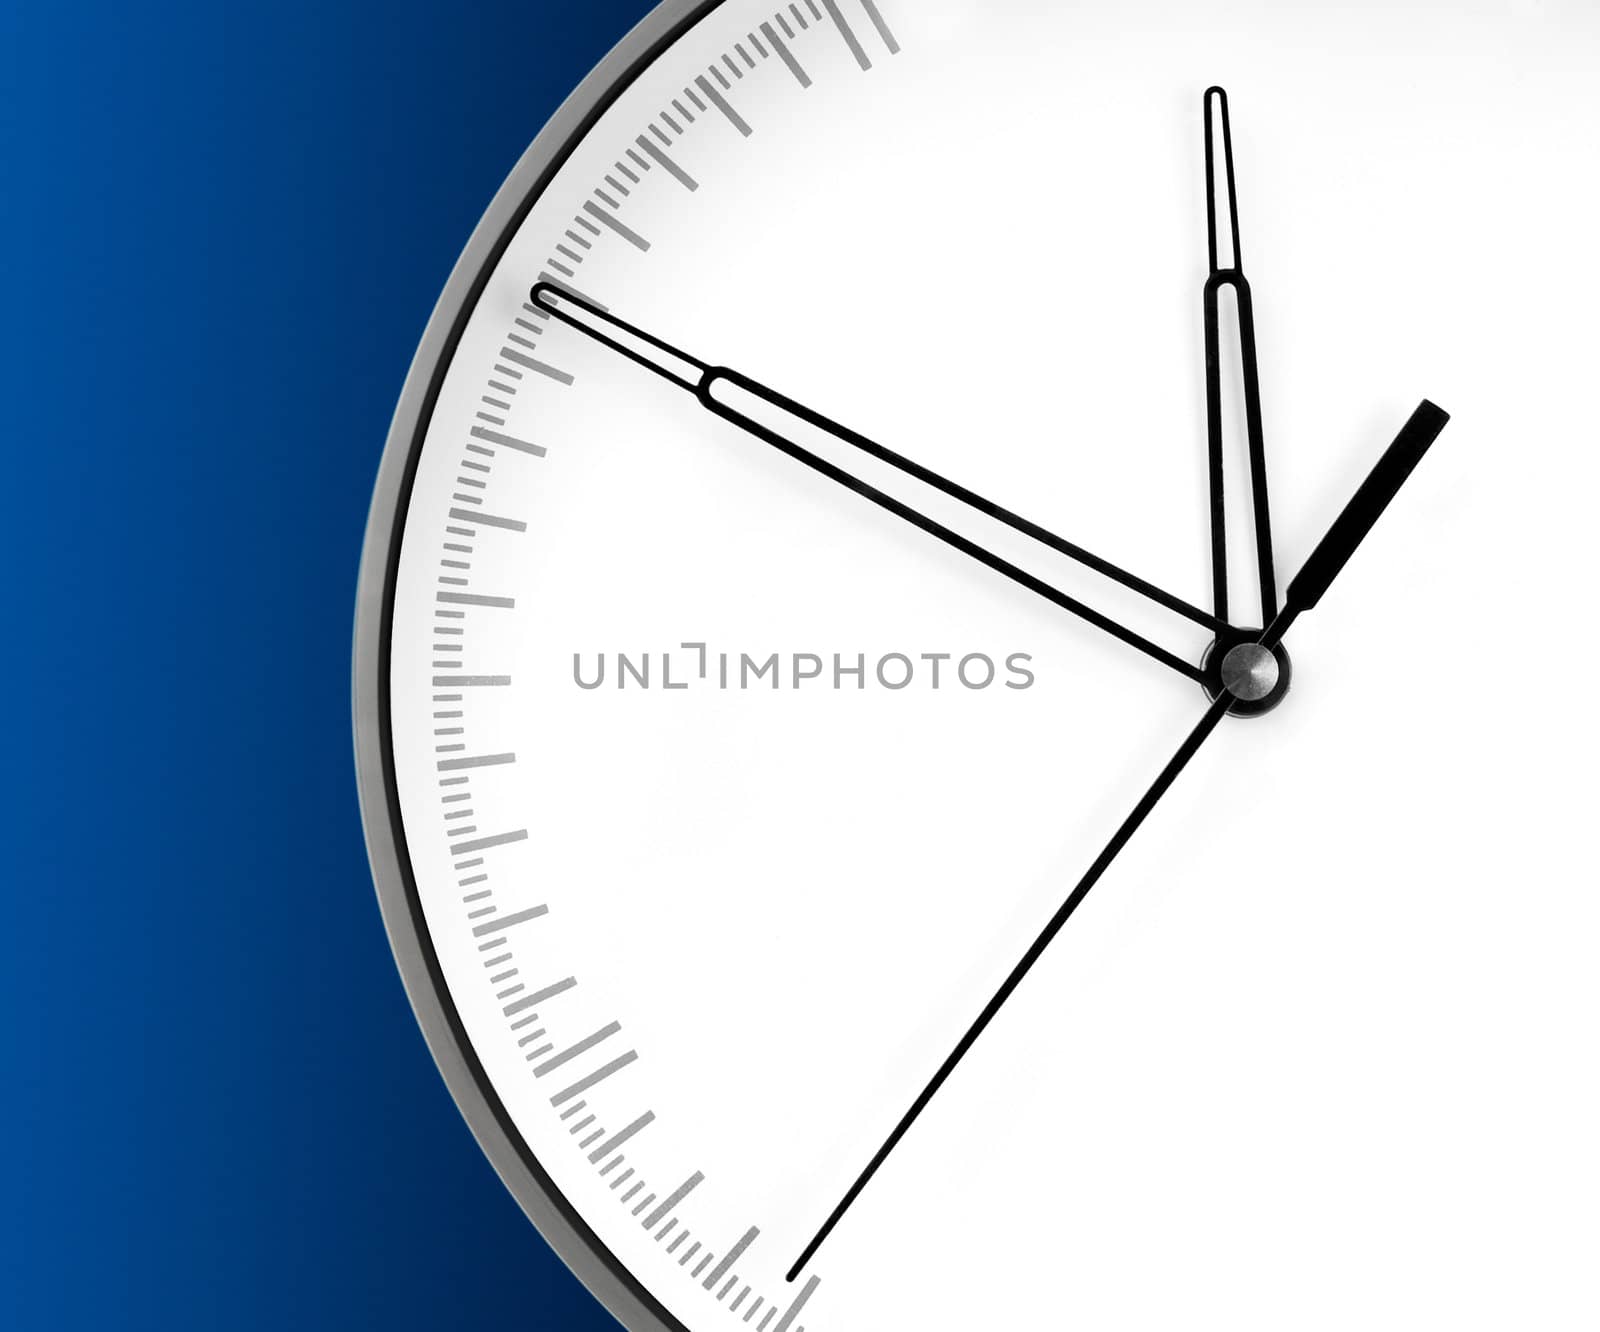 Wall Clock, isolated on blue background by zeffss